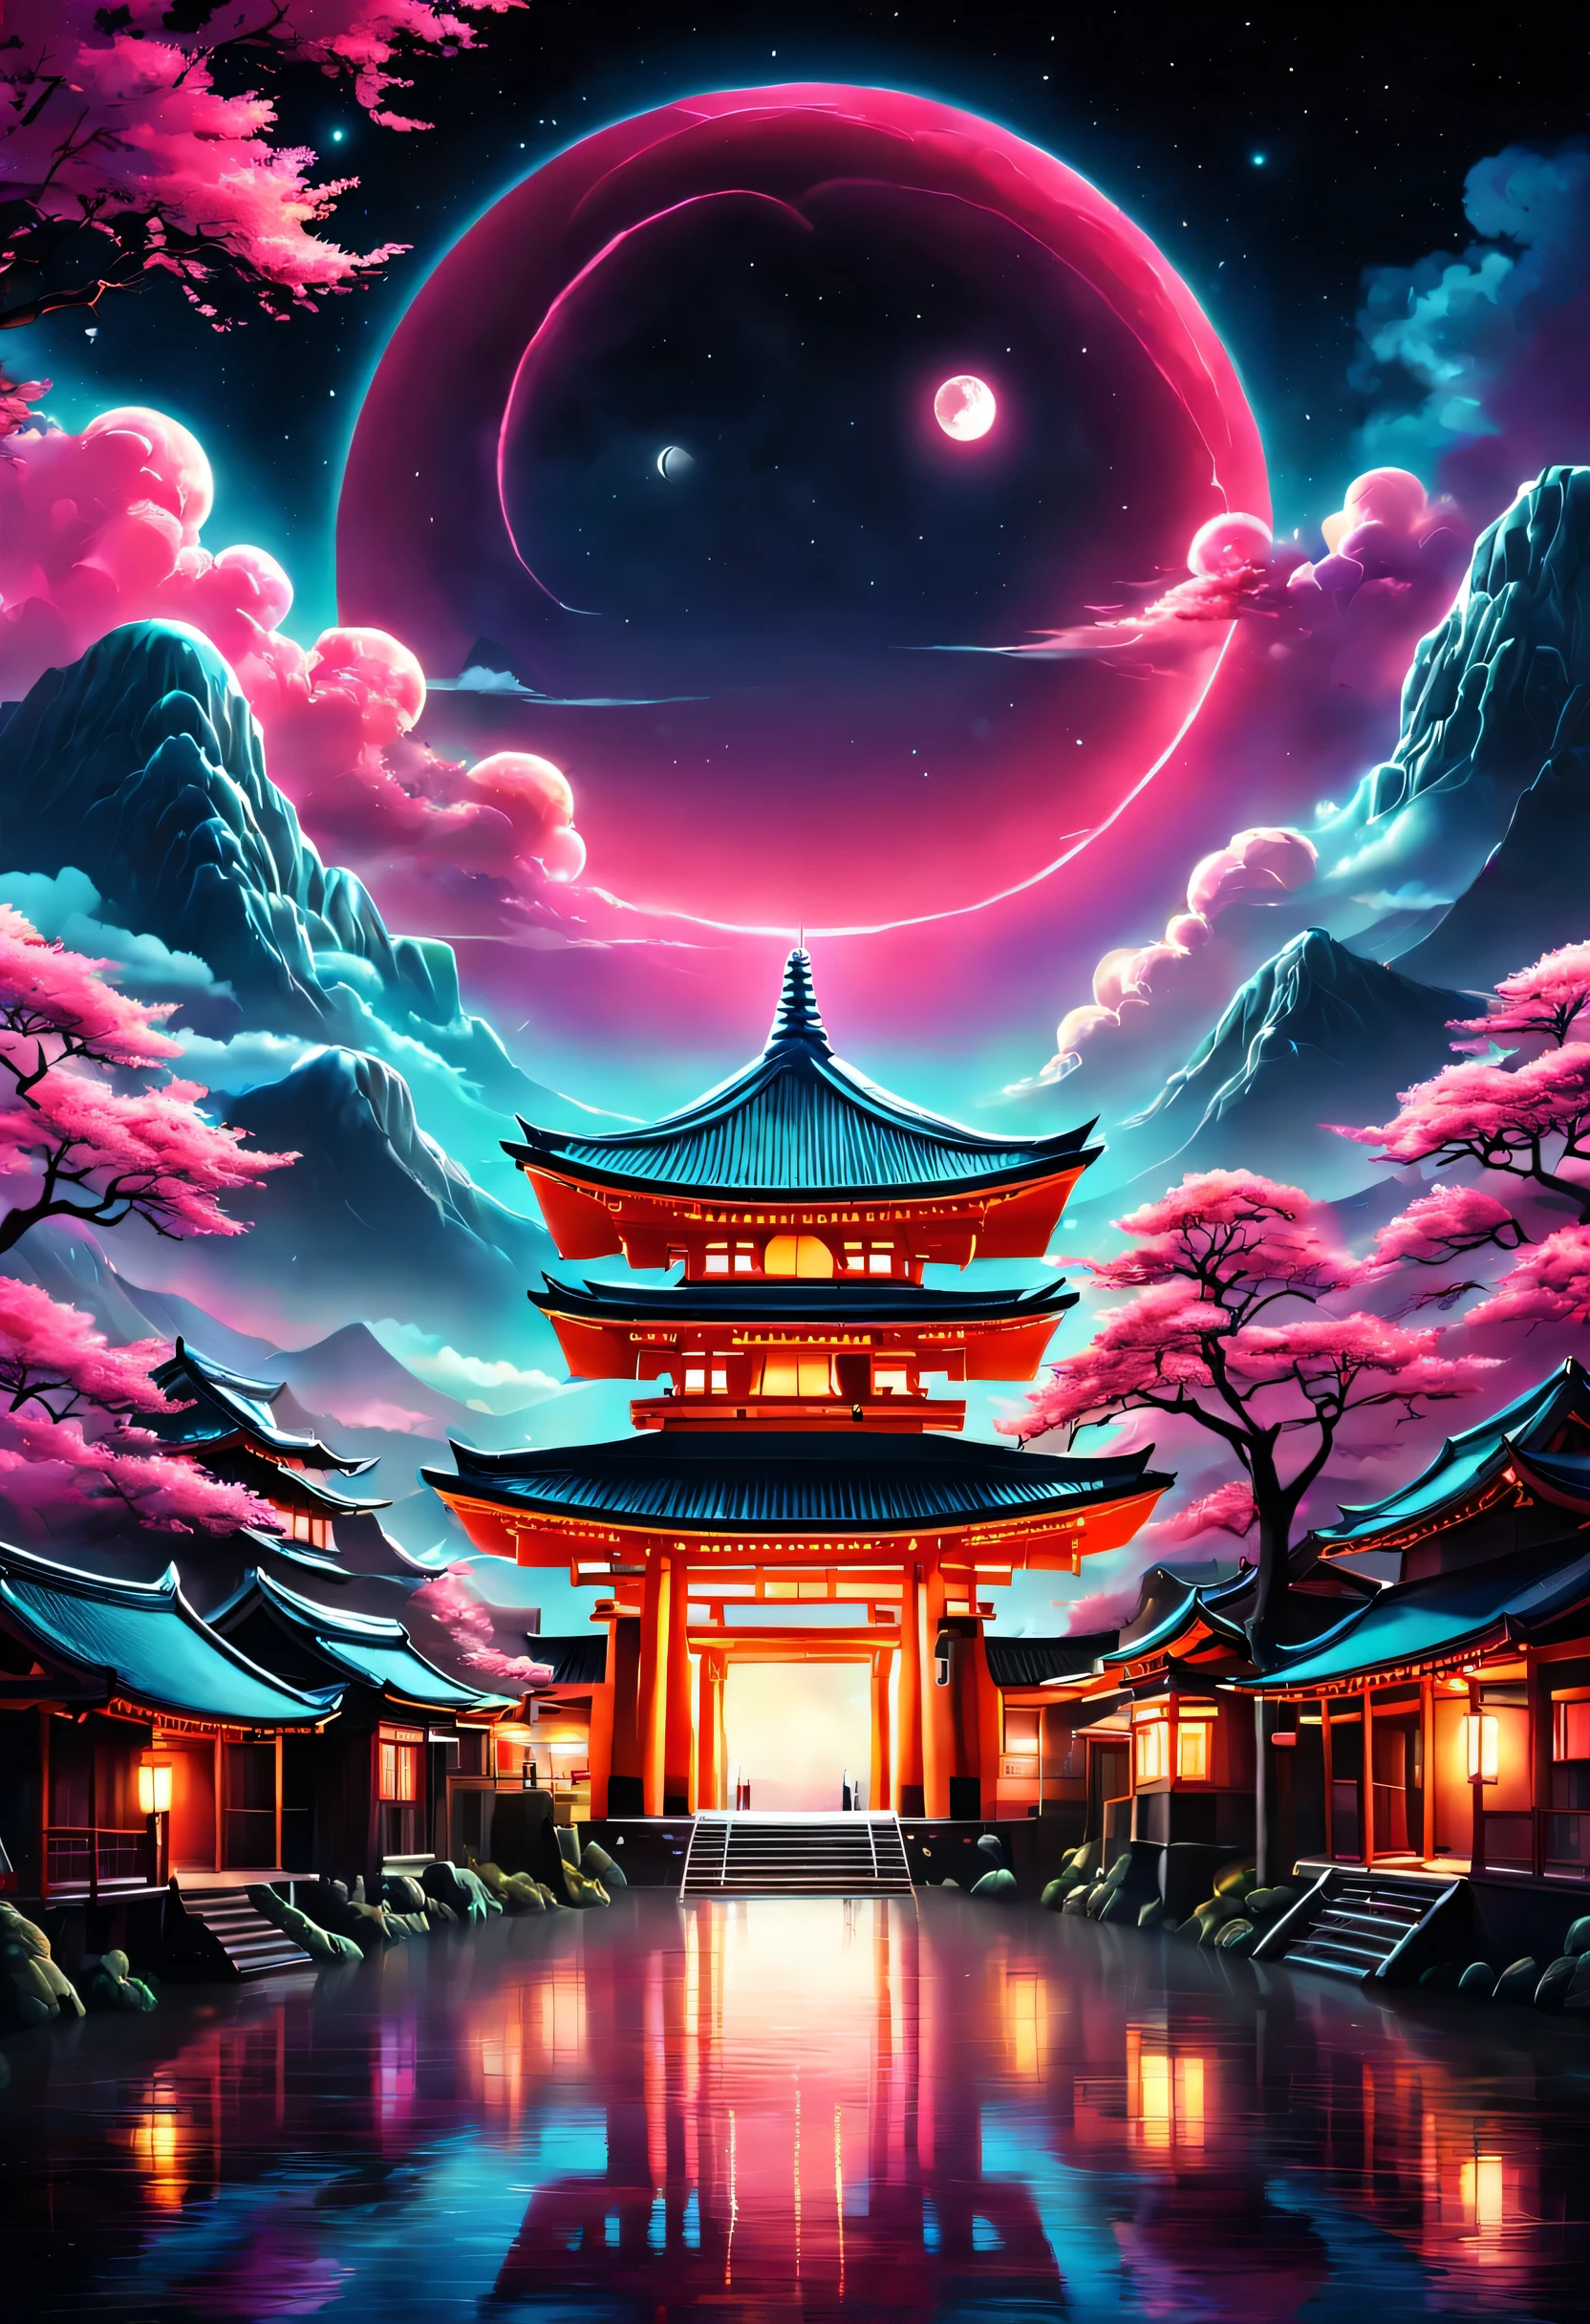 The aesthetics of Vaporwave,Landscape painting,Shrine painted in neon colors,Kyoto,Fushimi Inari,torii,two dancing demon foxes:silhouette,moon,star,cloud,aurora,beautiful,rich colors,flash,と明るいflash,Cast colorful spells,Draw in neon colors on a dark background,Fusion of good old Japanese scenery and modern art,Pop Illustration,poster,perfect composition,Design that expresses Japan,zentangle,magic elements,wonderful,masterpiece,4K,works of art,Bright colors,black,pink,Light blue,purple